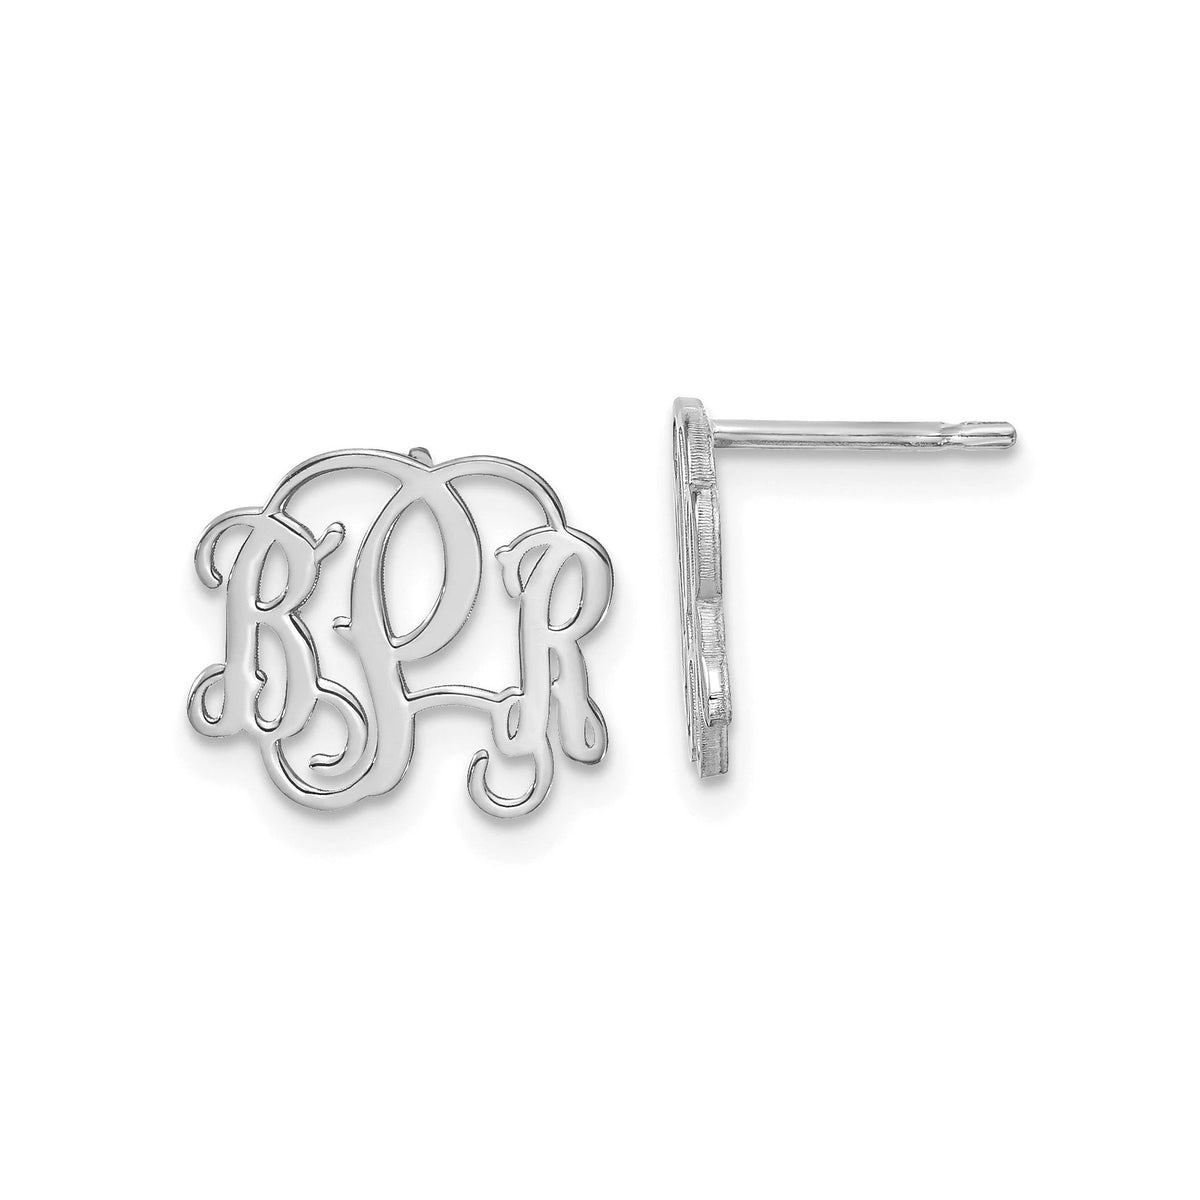 Personalized Monogram Stud Earrings Available in Sterling Silver Gold Plated Silver & 14k Gold - Gift Box Included Made in USA